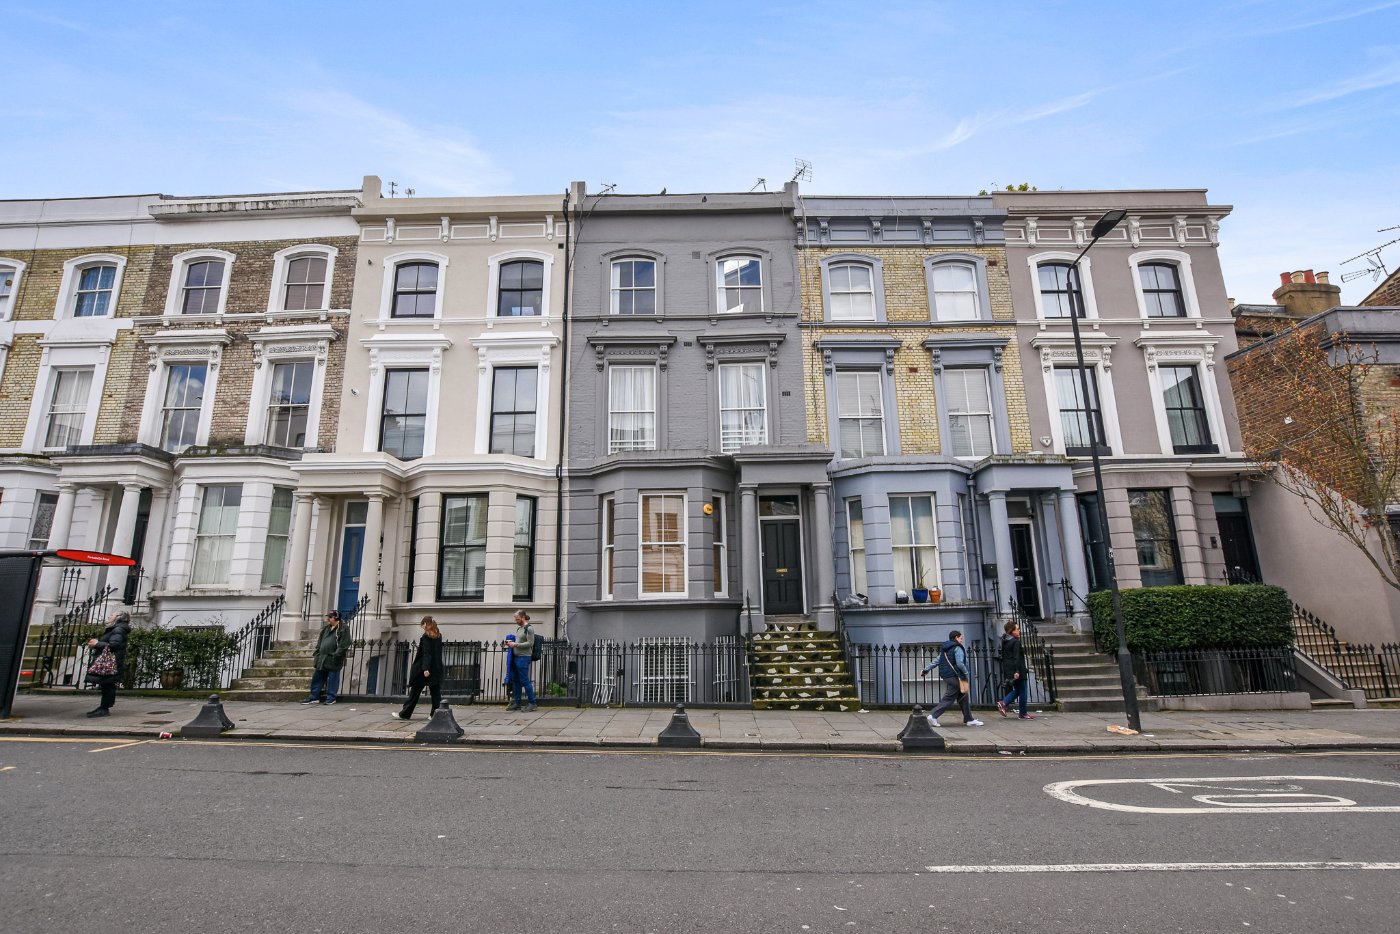 Westbourne Park Road, Notting Hill, W11 2 bedroom flat/apartment in Notting Hill